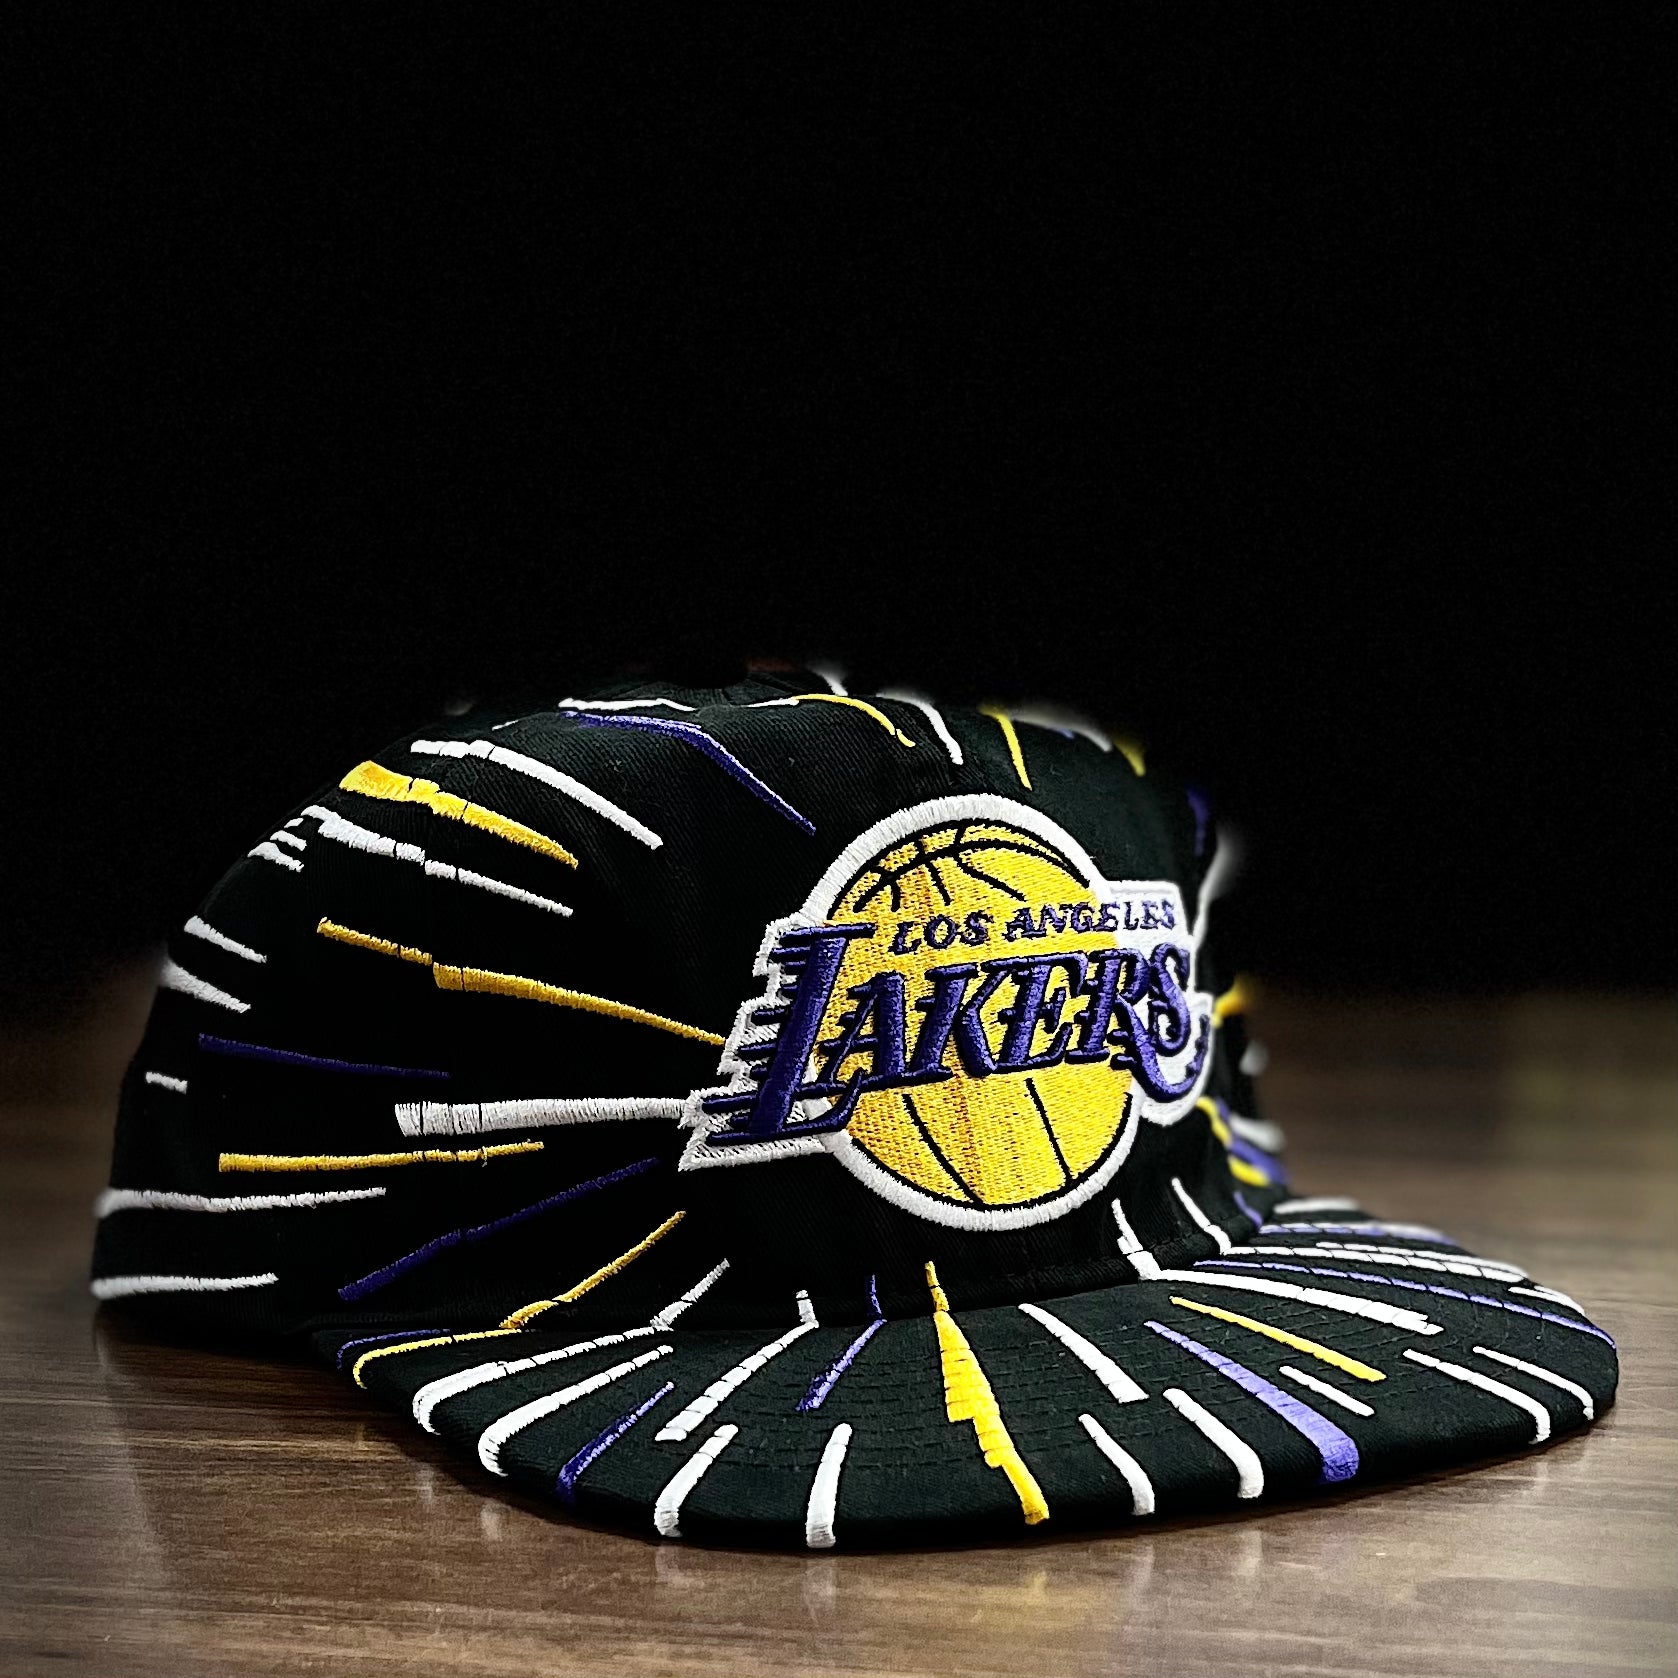 mitchell & ness lakers hat